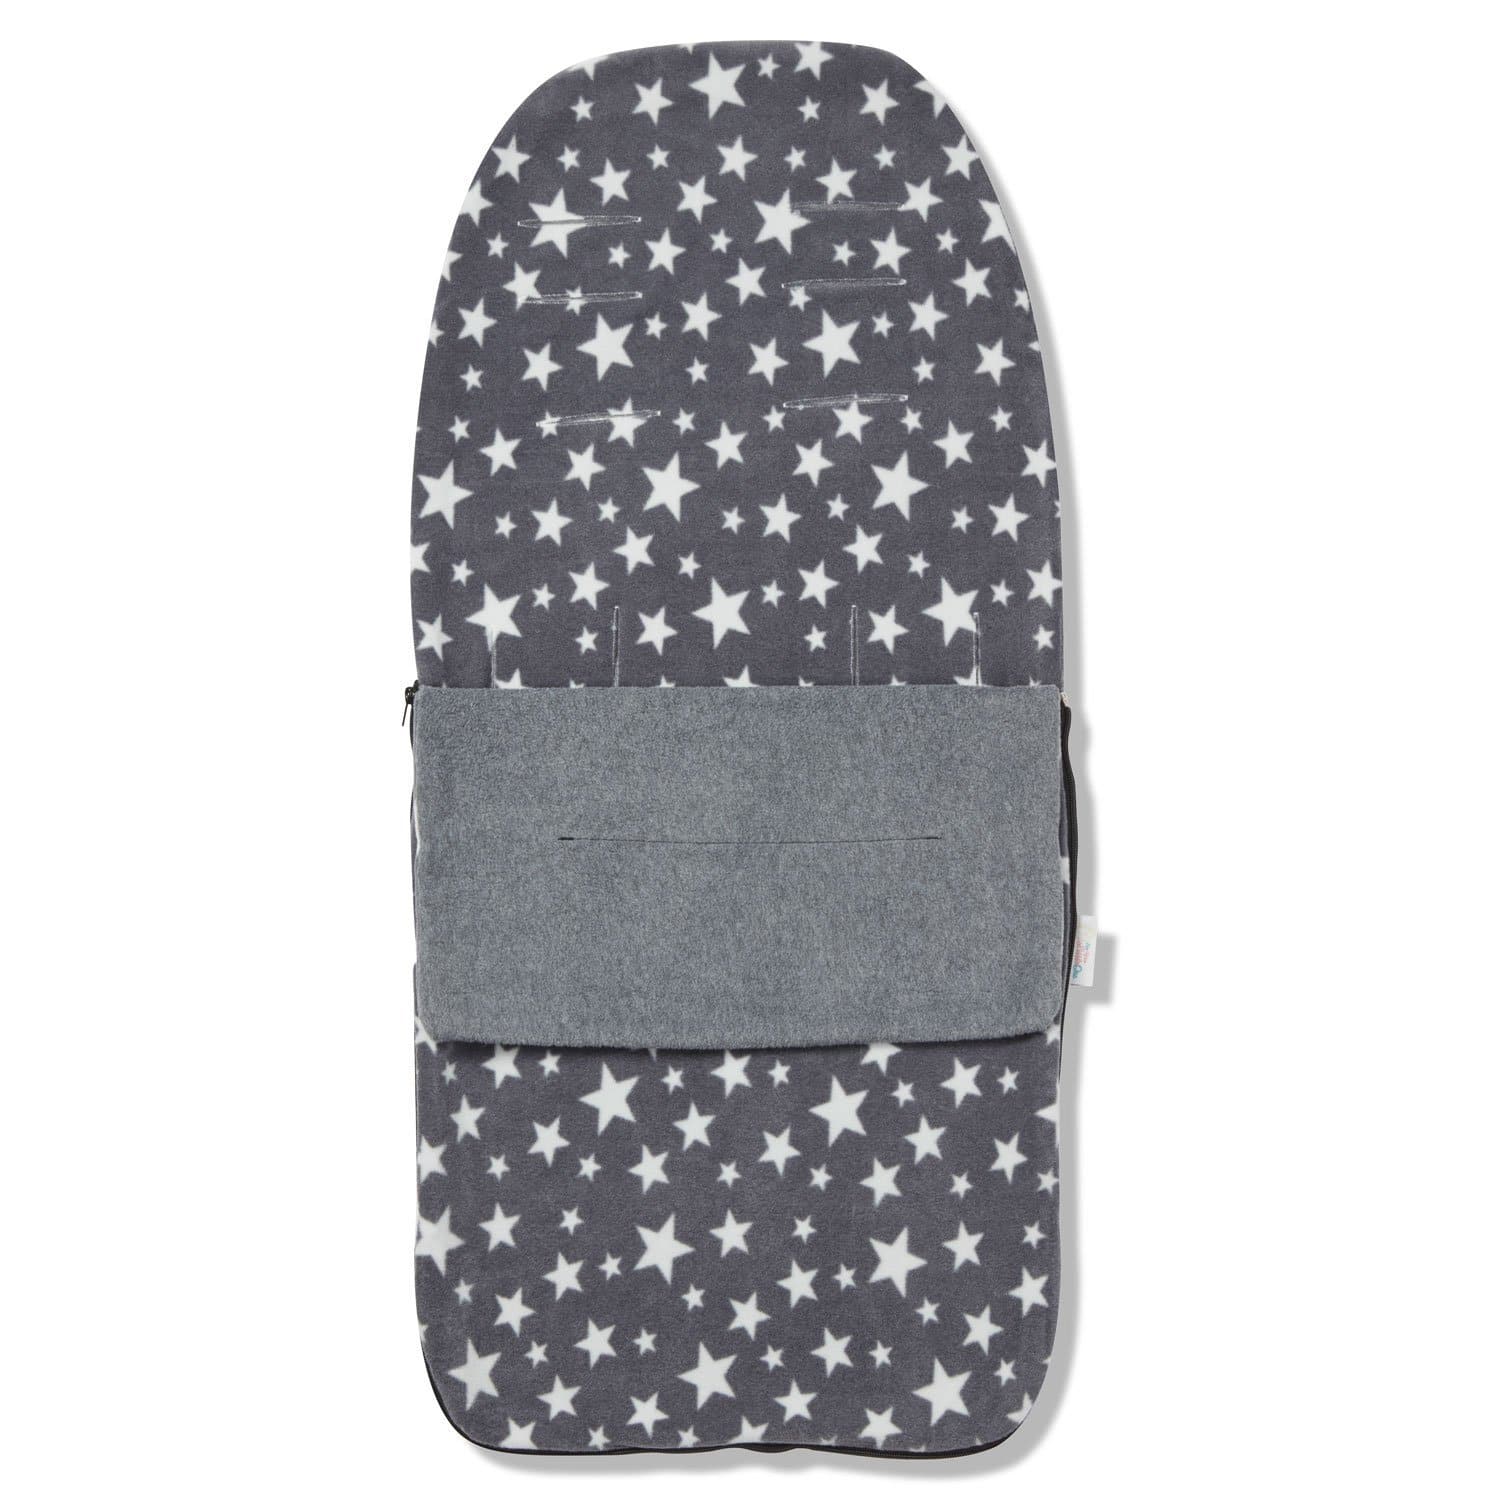 Snuggle Summer Footmuff Compatible with Babybus - For Your Little One